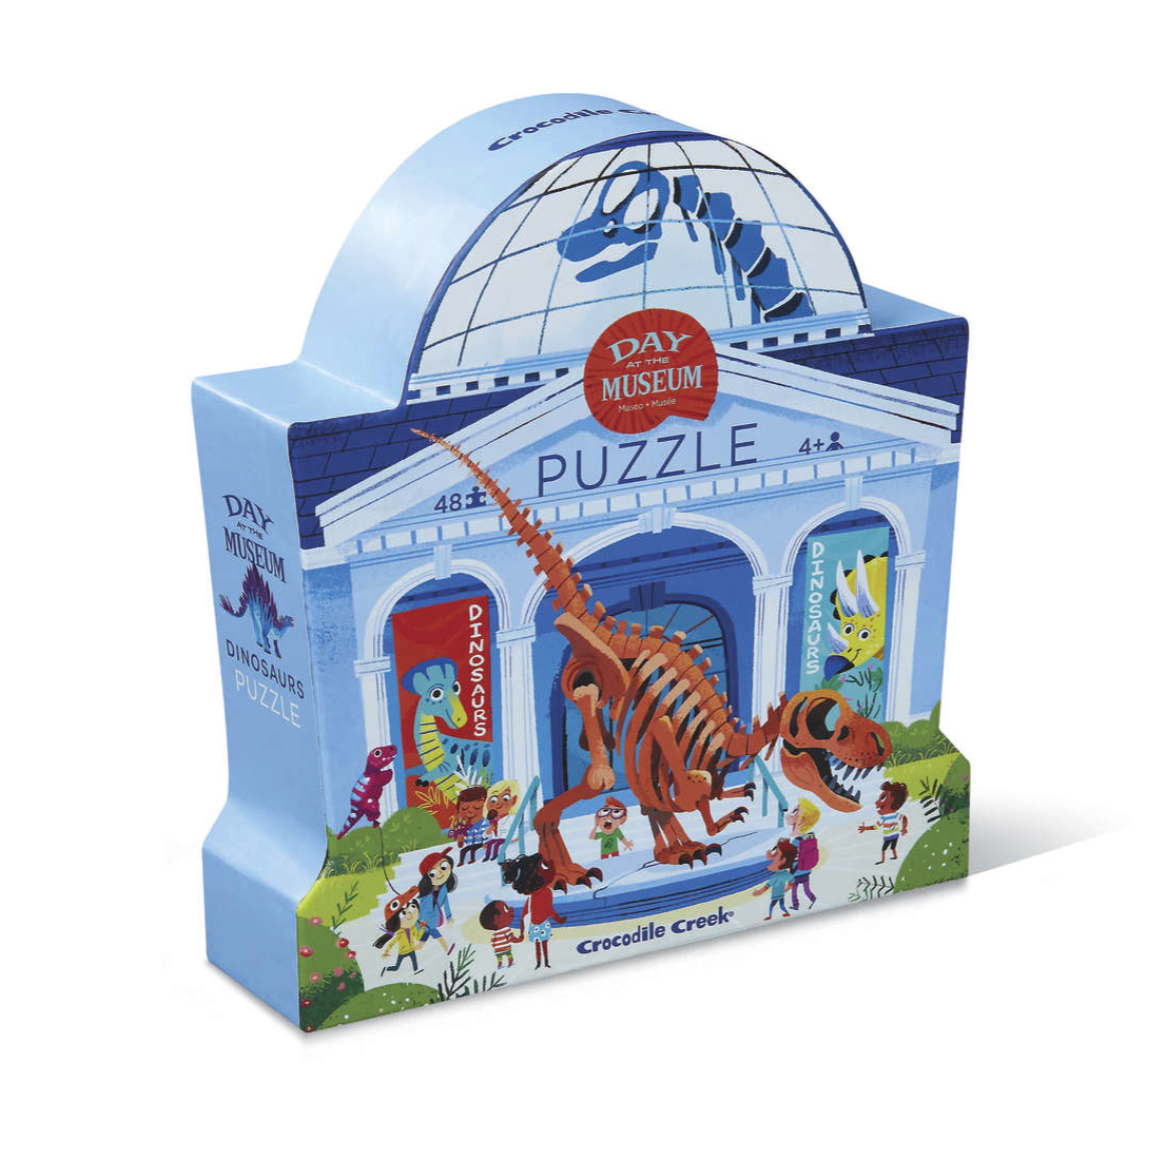 A DAY AT THE MUSEUM PUZZLE 48PC - DINOSAUR